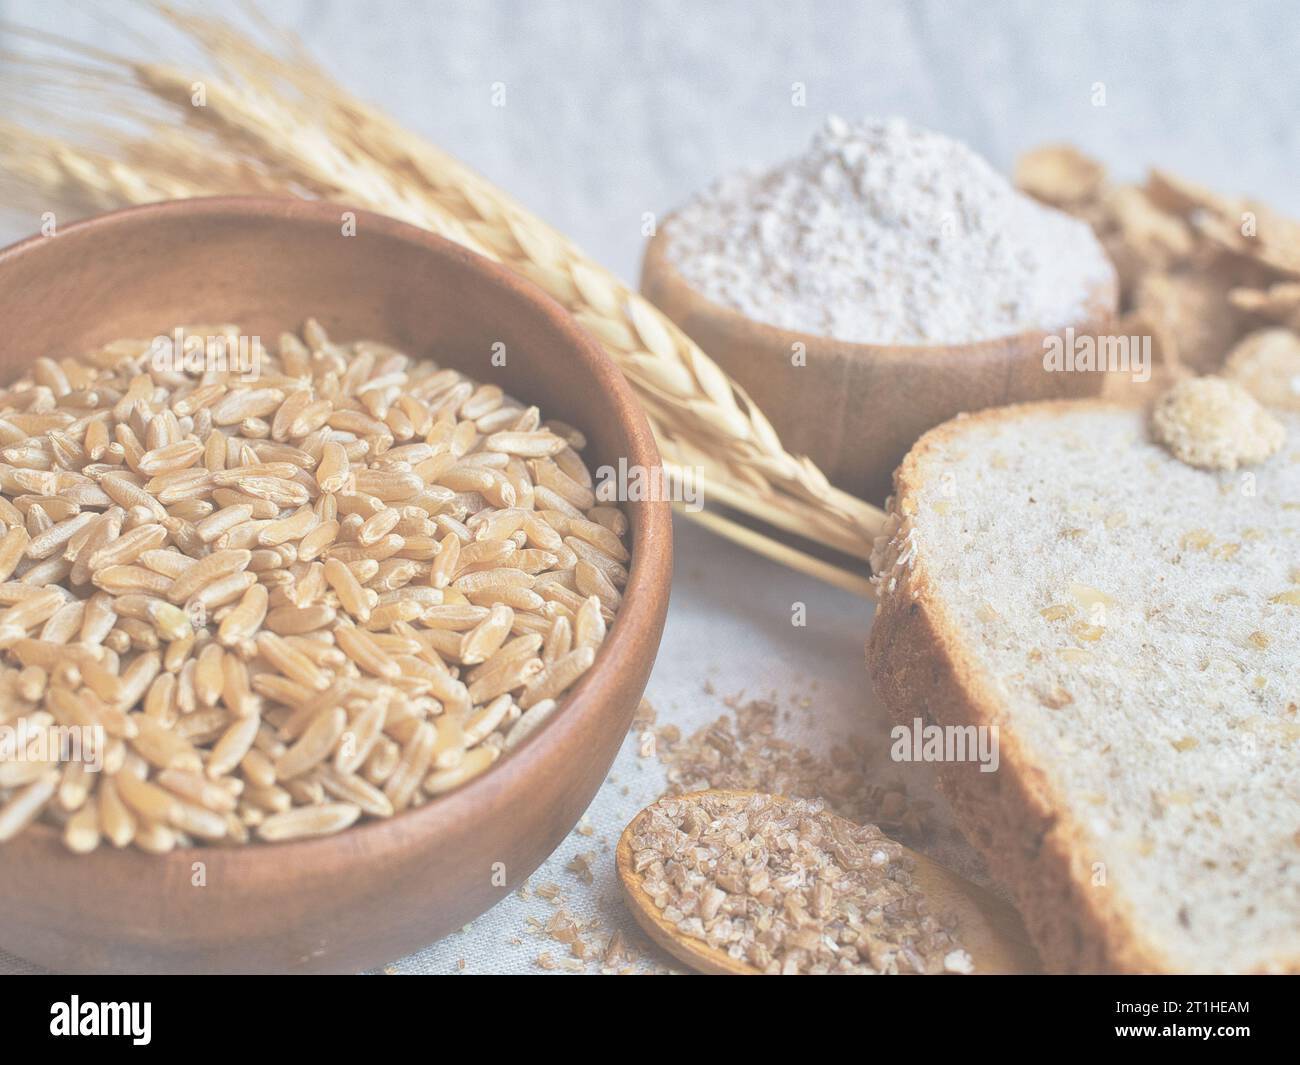 Whole grain wheat in different forms in still life on linen-covered table. Whole grain organic wheat crops including khorasan wheat, bulgur, and bread. Stock Photo